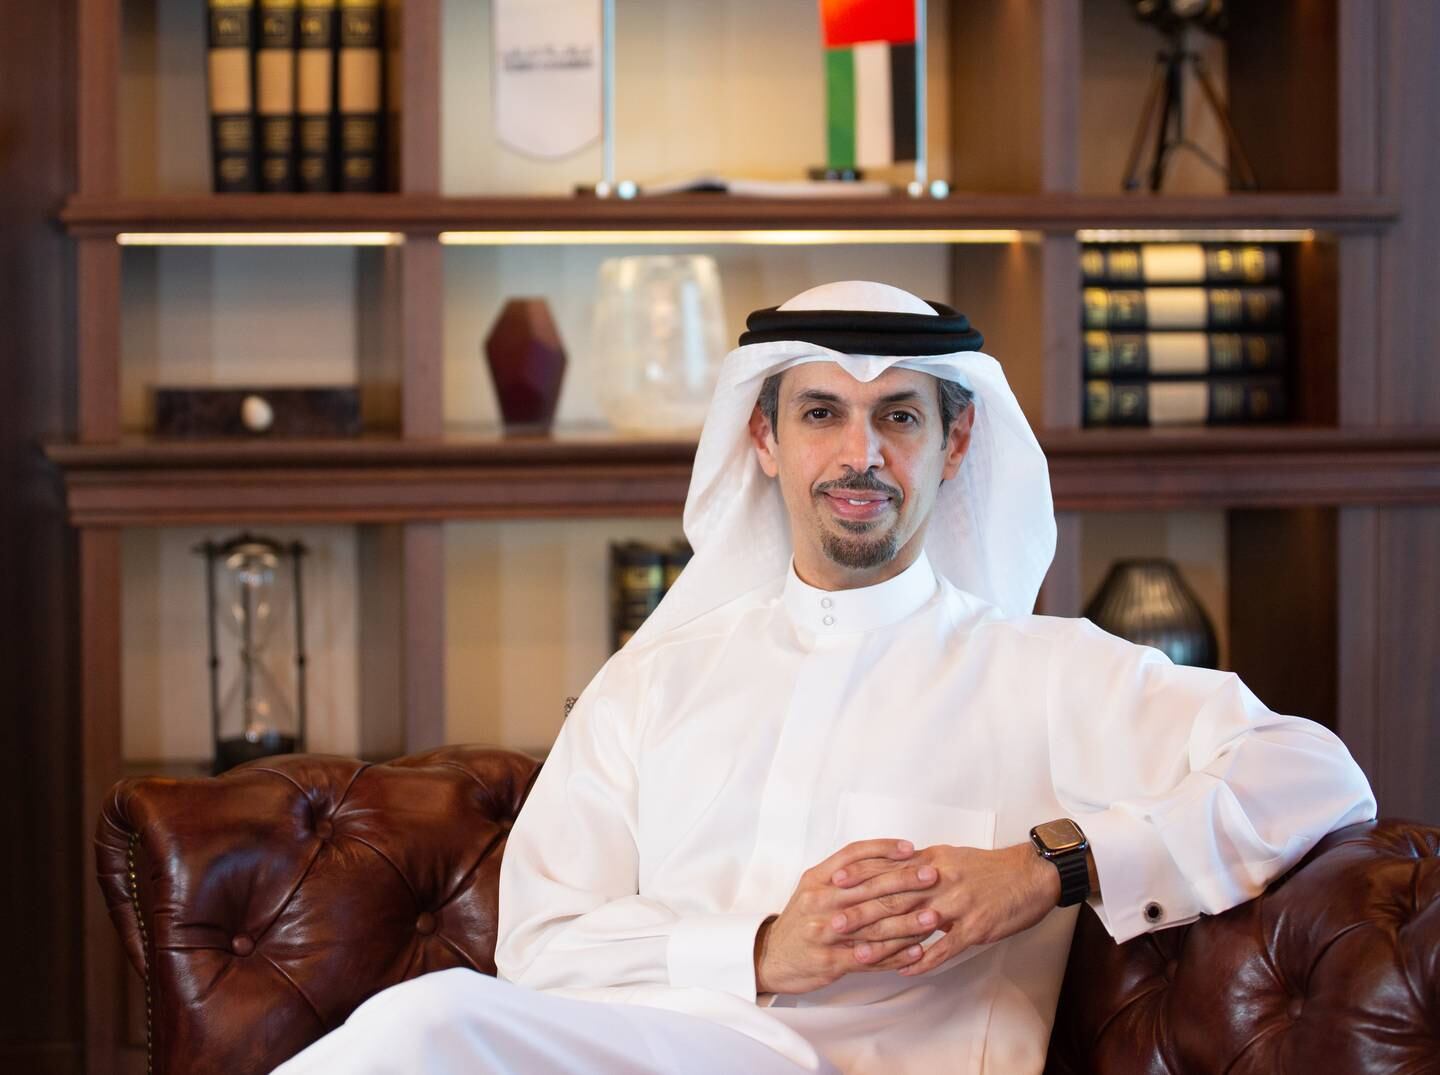 Hamad Buamim, president and chief executive of Dubai Chamber of Commerce, said FinTech start-ups have become a catalyst for creating and developing an innovation ecosystem in the region. Photo: supplied